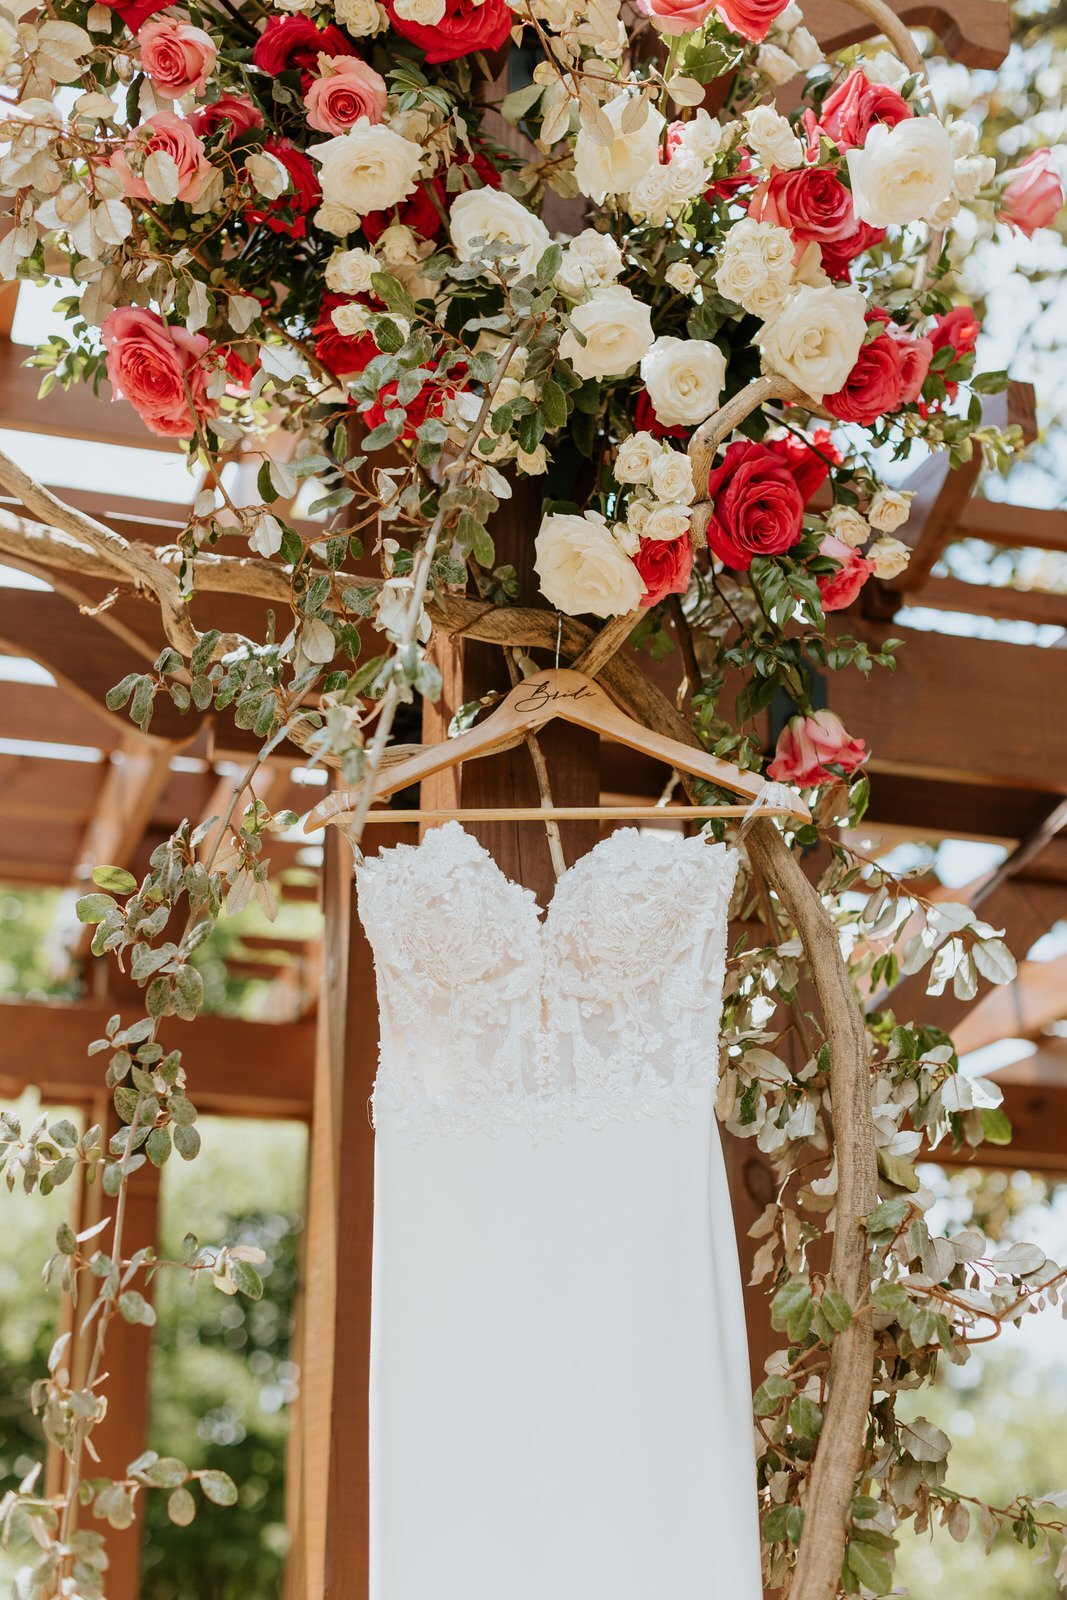 wedding dress hanging by flowers